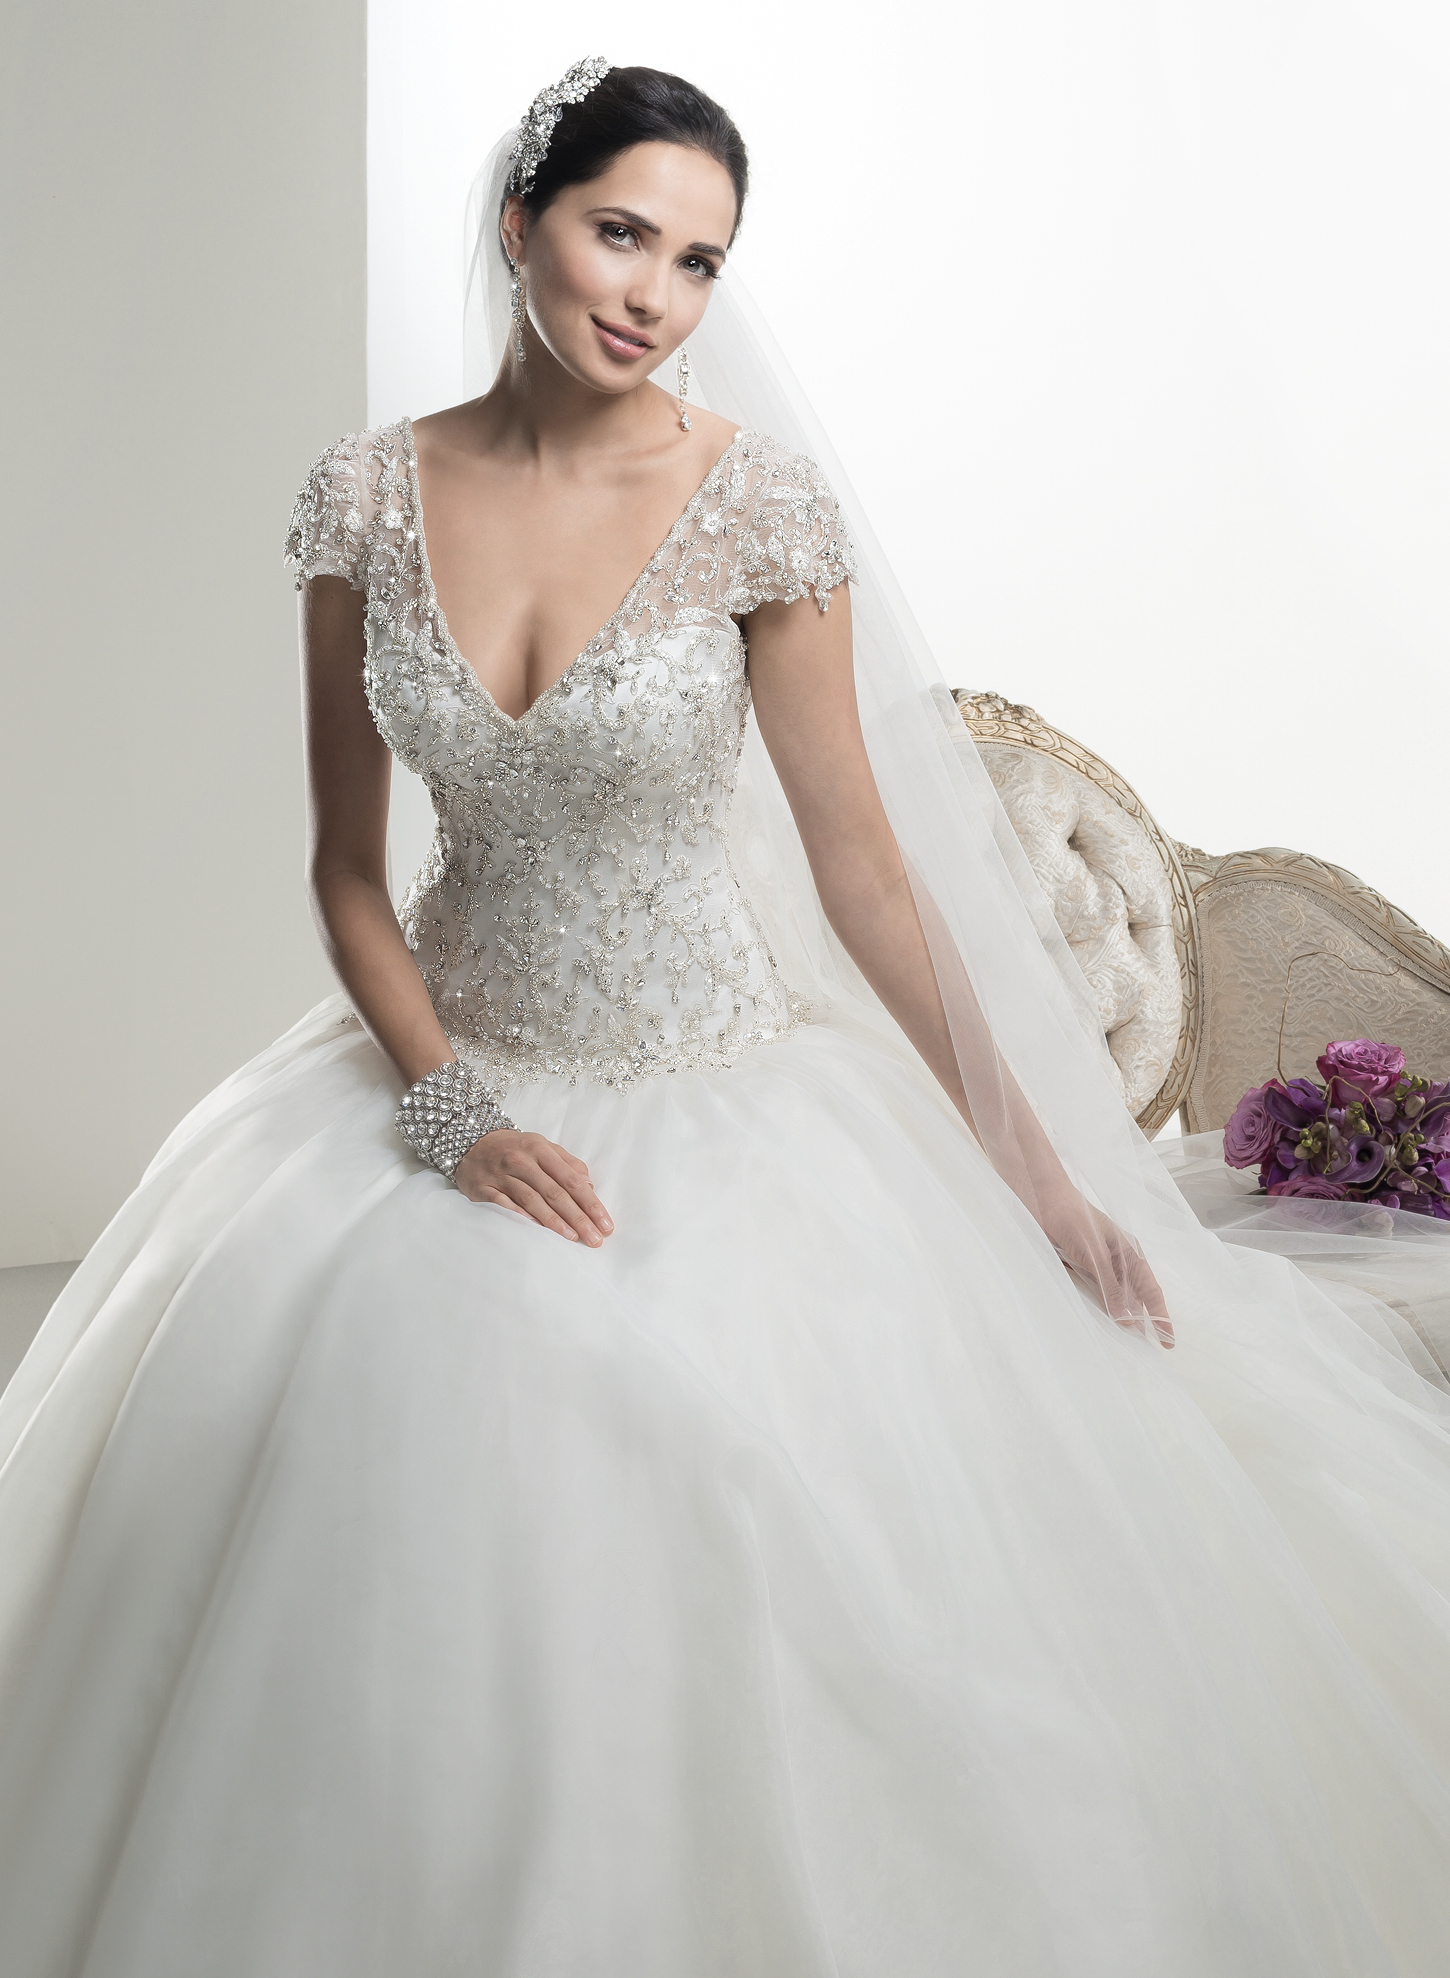 Spectacular Wedding Dresses by Maggie Sottero